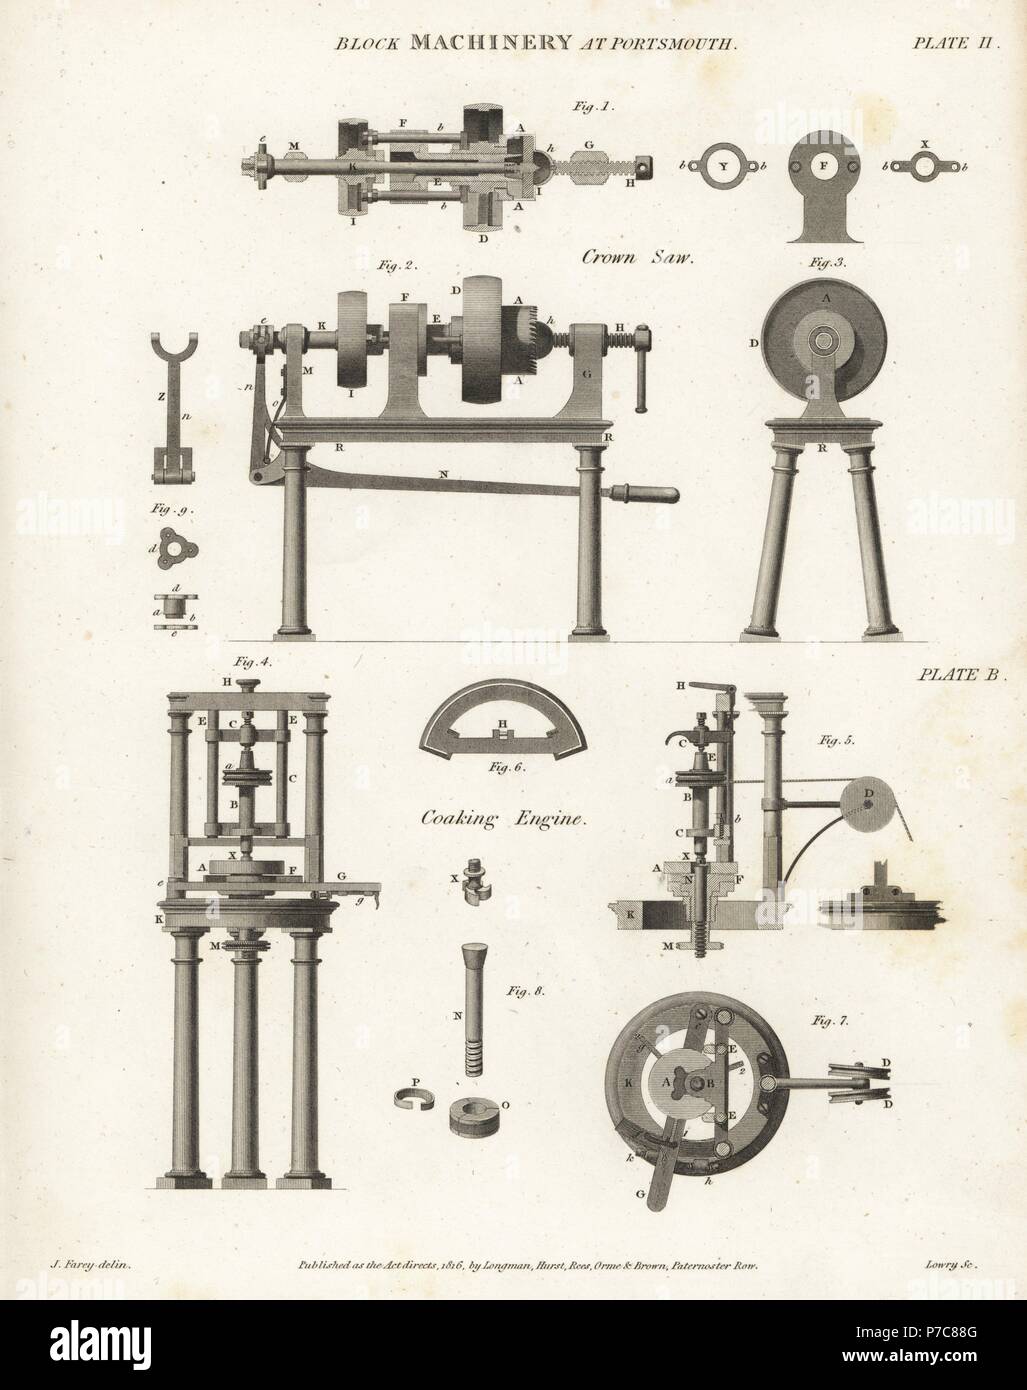 Crown saw and coaking engine, Block Machinery at Portsmouth naval harbour, 18th century. Copperplate engraving by Wilson Lowry after a drawing by John Farey from Abraham Rees' Cyclopedia or Universal Dictionary of Arts, Sciences and Literature, Longman, Hurst, Rees, Orme and Brown, London, 1816. Stock Photo